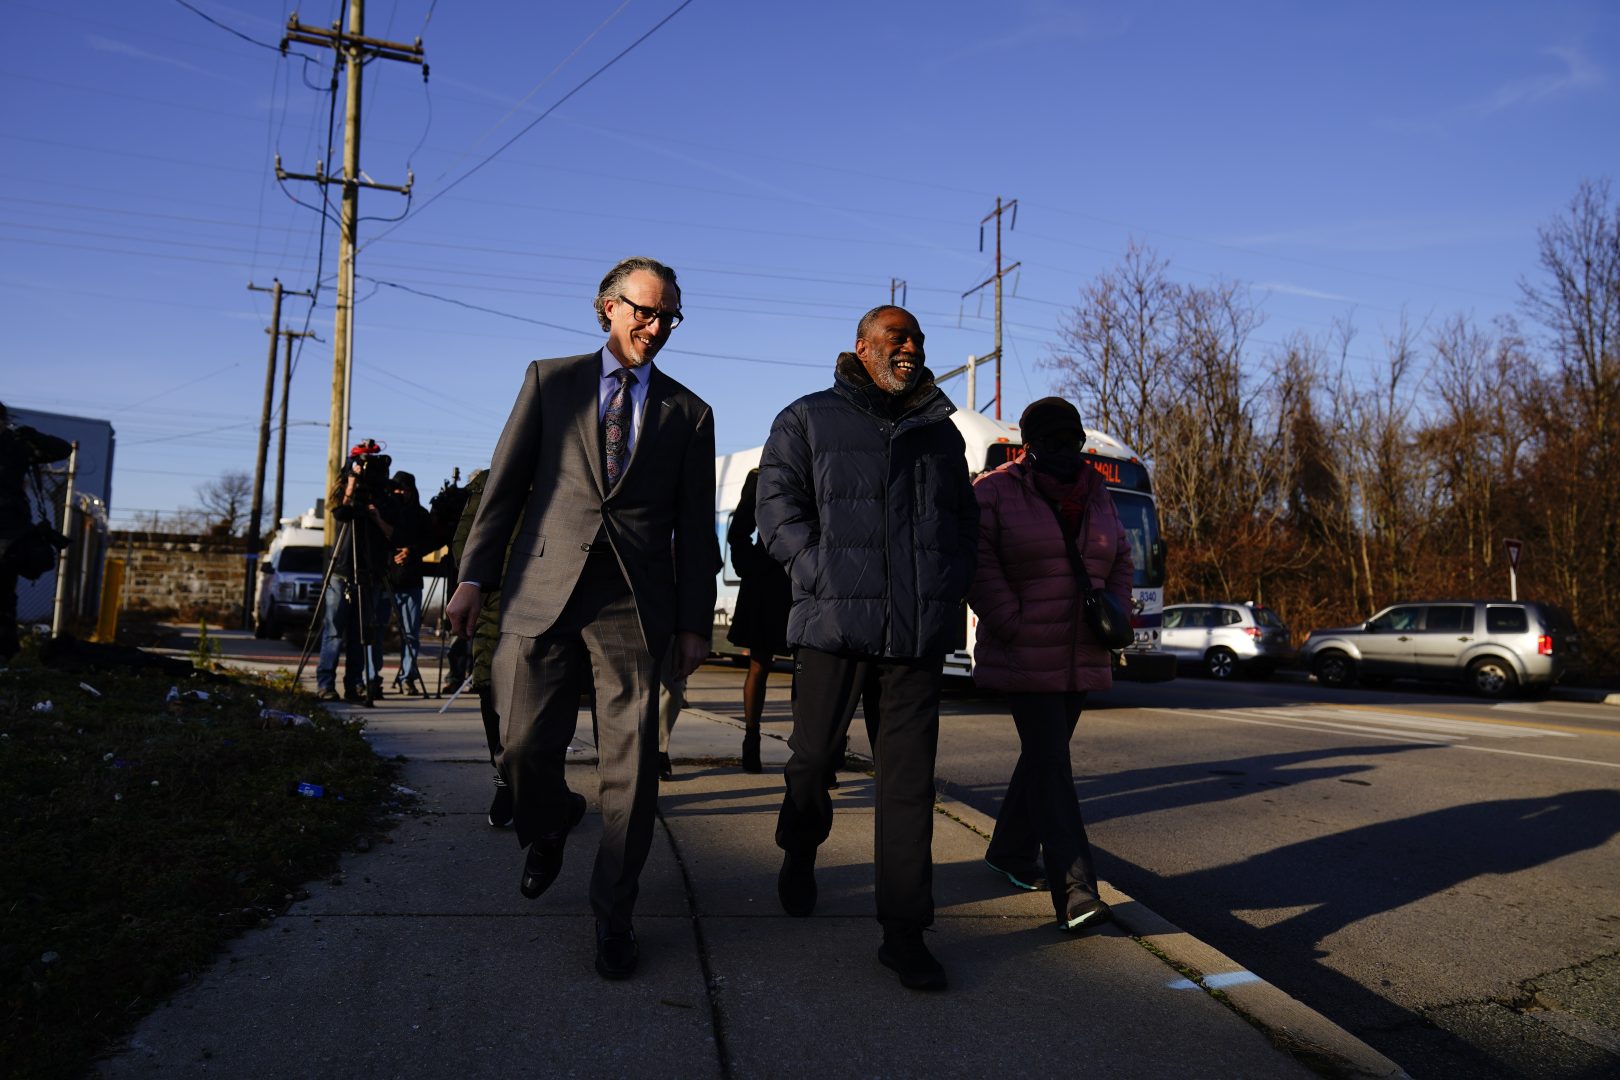 Willie Stokes, center, and lawyer Michael Diamondstein walk in Chester, Pa., on Tuesday, Jan. 4, 2022, after Stokes' 1984 murder conviction was overturned because of perjured witness testimony. Stokes was serving a life sentence and spent decades in prison before learning the witness who testified against him at a 1984 court hearing soon pleaded guilty to perjury over the testimony. 